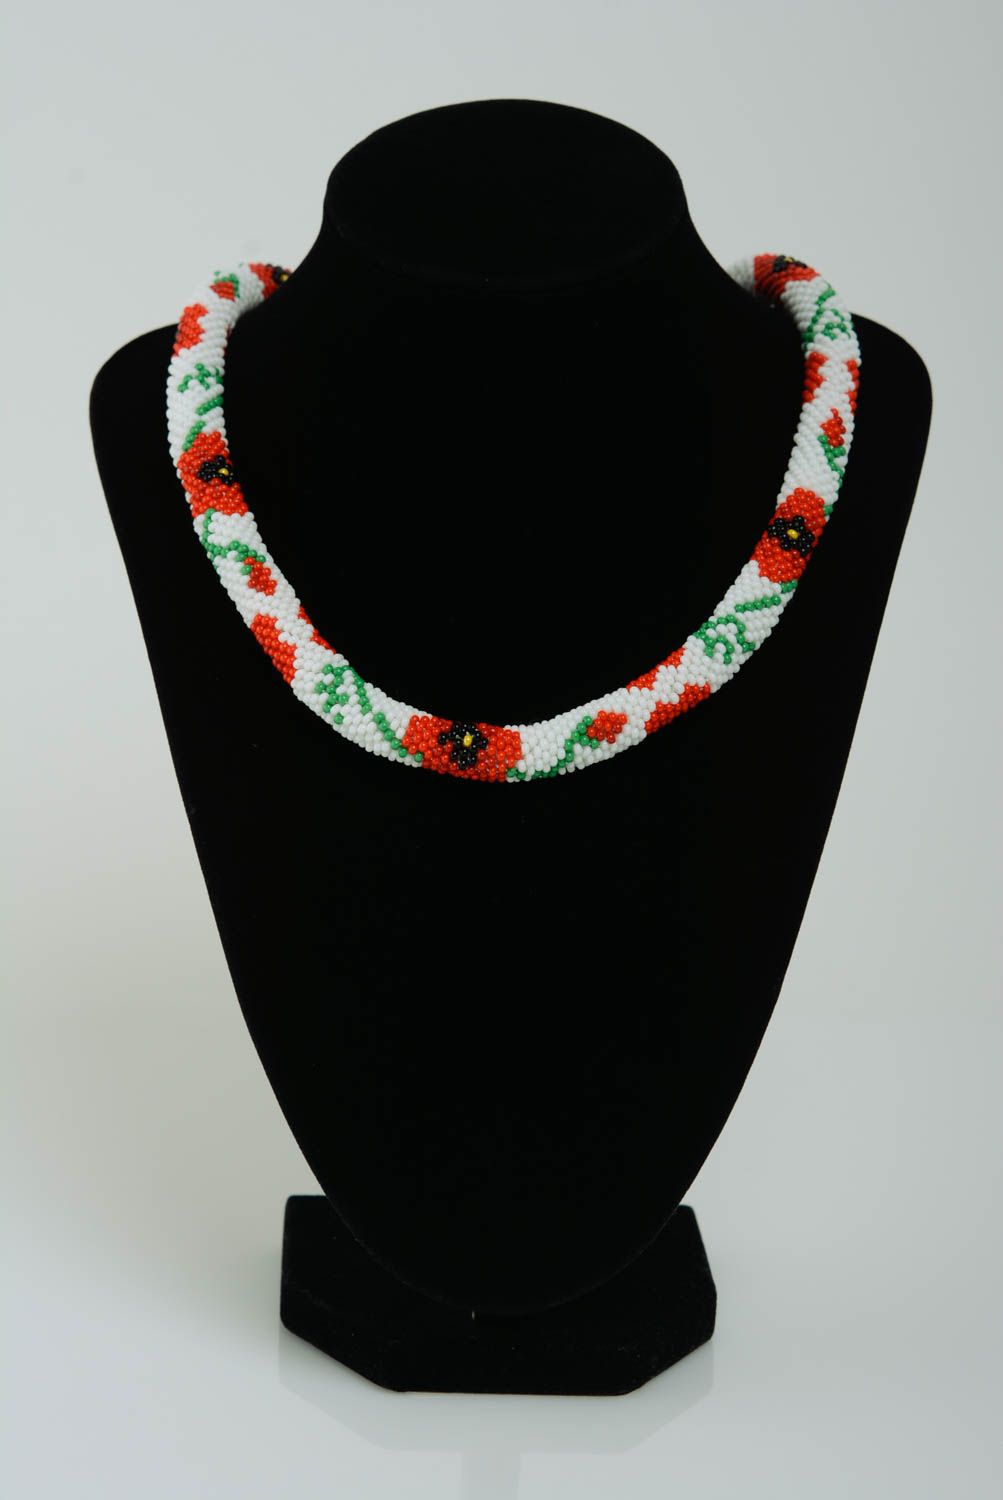 Beaded handmade cord necklace with flowers red poppies on white background photo 2